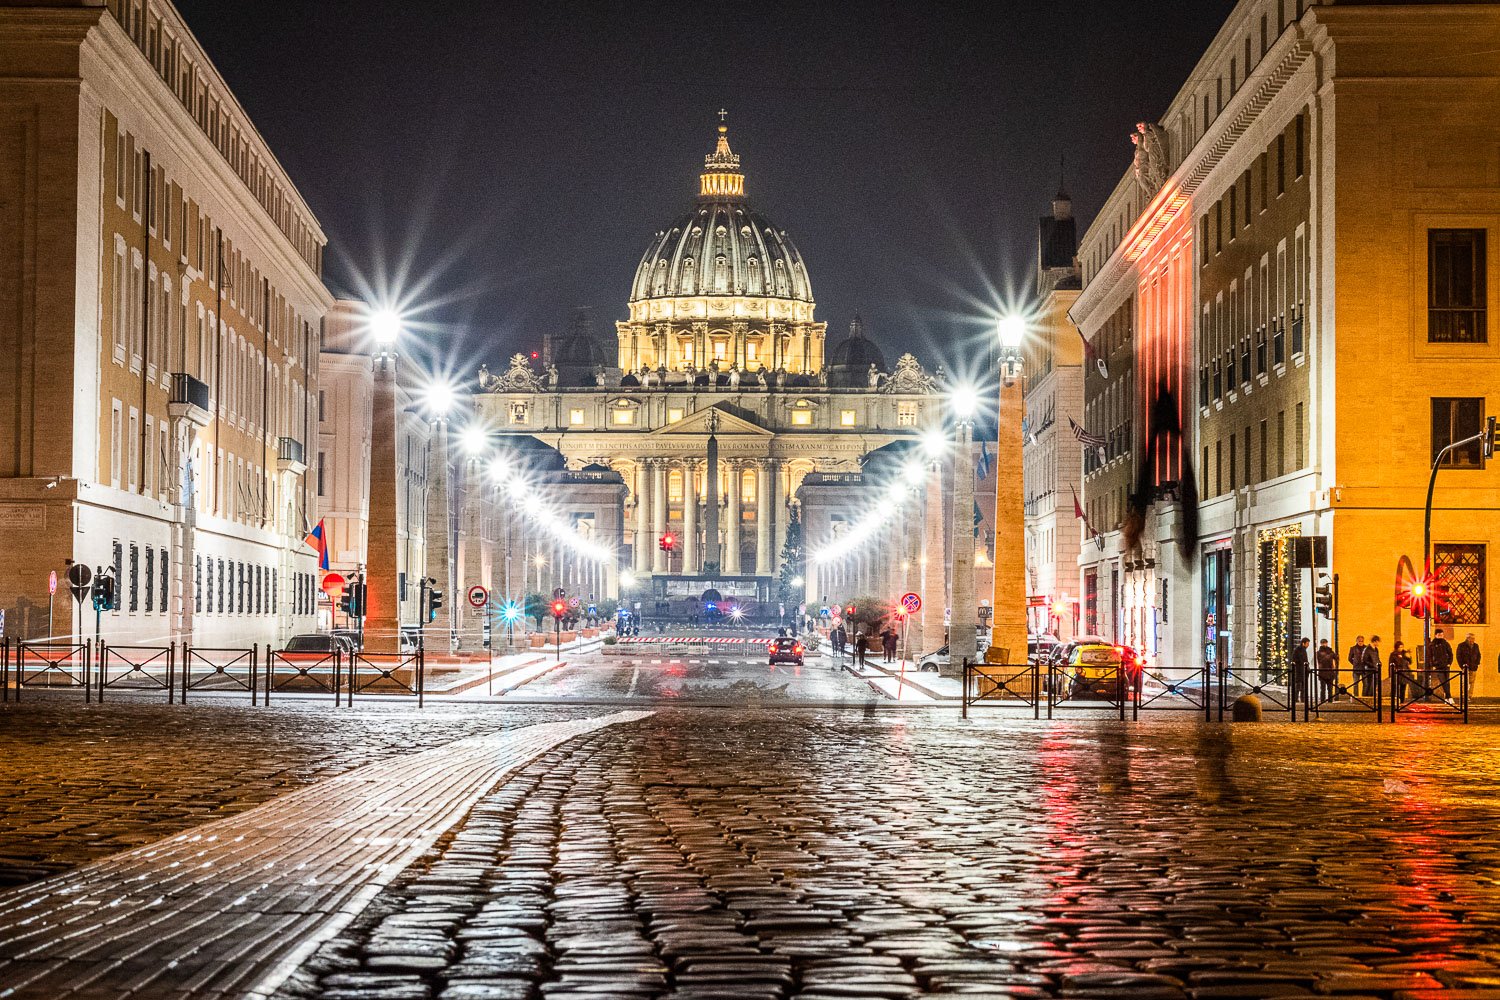 beautiful places in rome italy - Saint Peter's Basilica